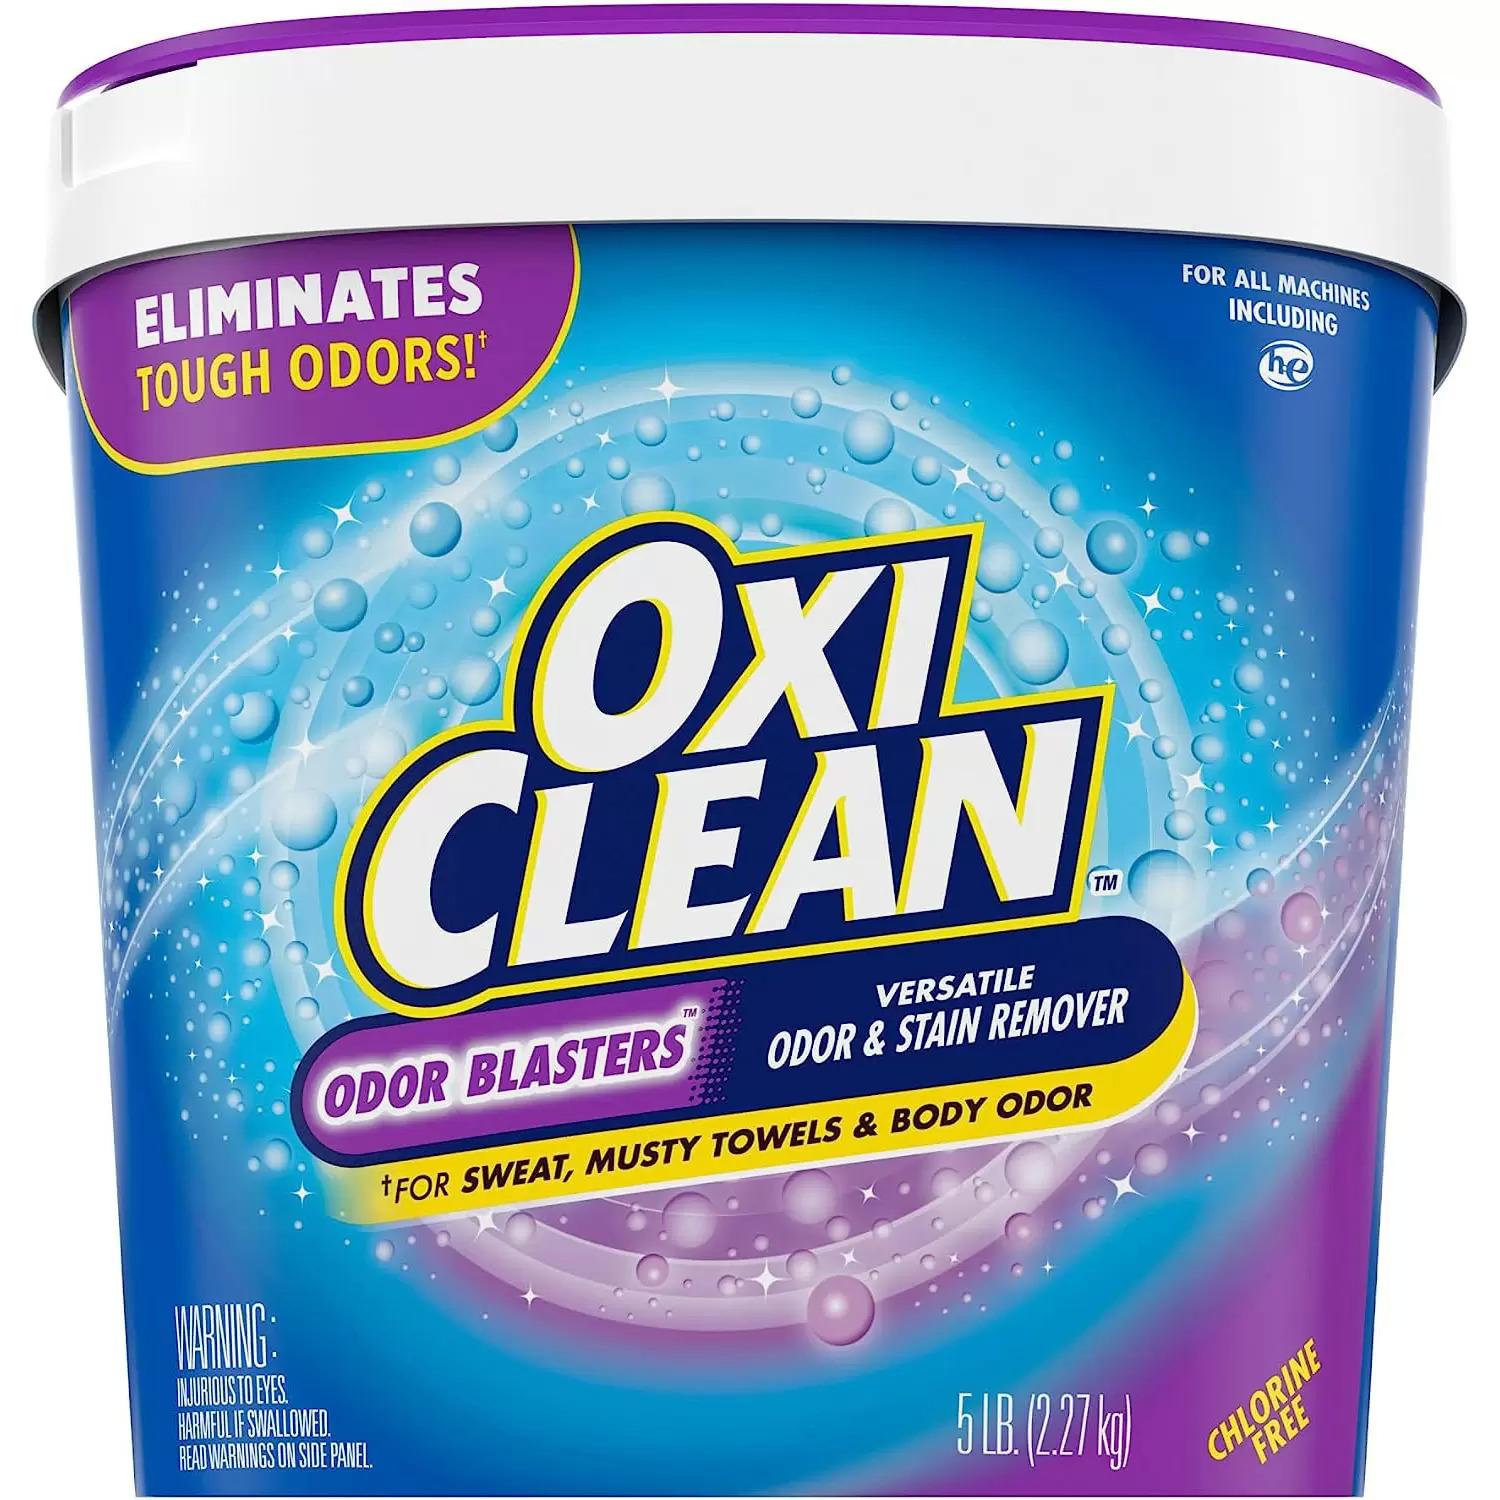 OxiClean Odor Blasters and Stain Remover Powder Laundry for $8.24 Shipped